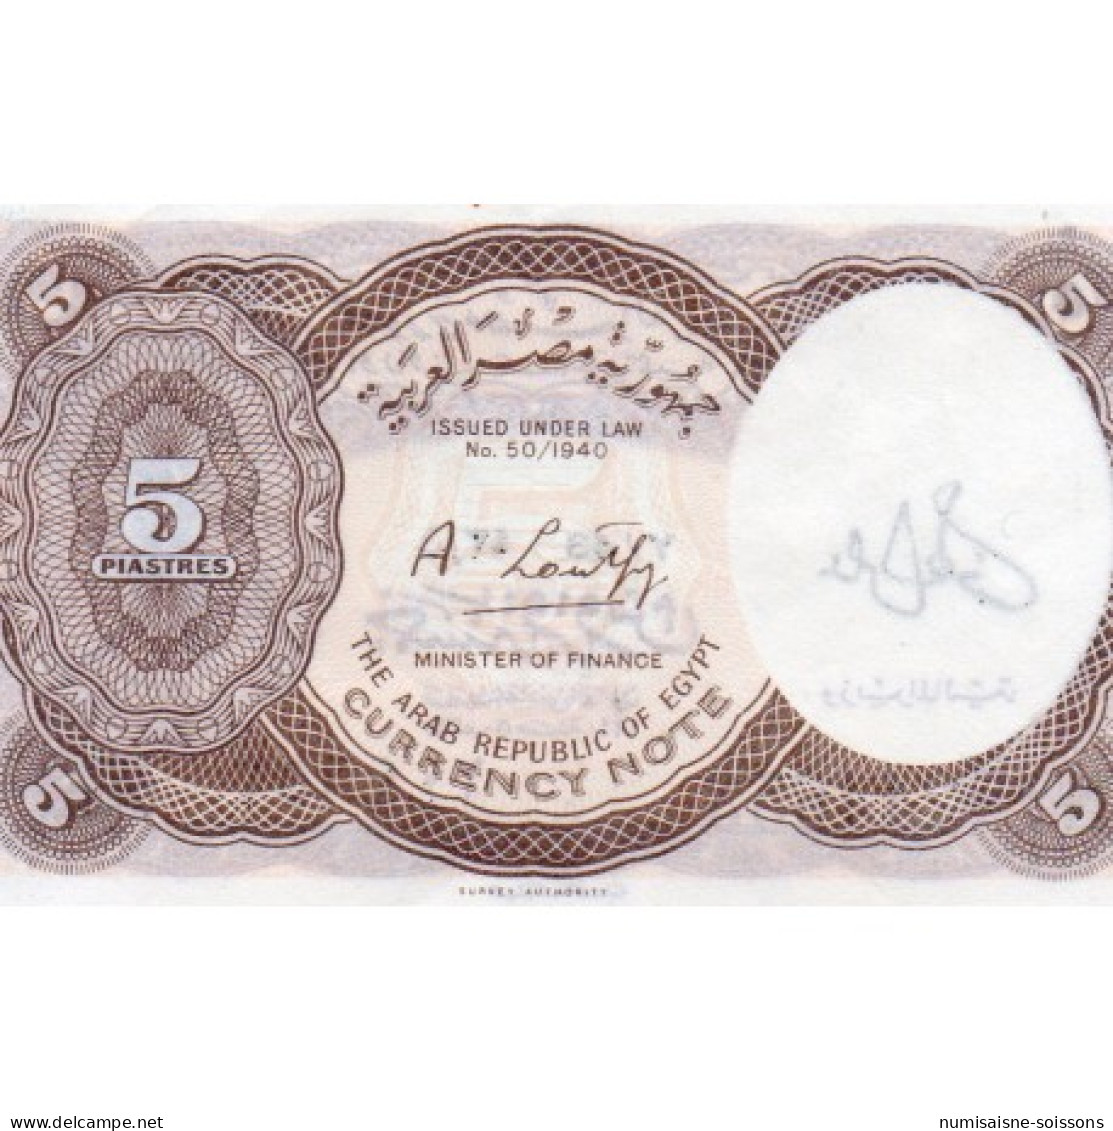 EGYPTE - PICK 182 G - 5 PIASTRES - L.1940 (ND1971) - Sign A.LOUTFY - SERIE 43 - SUP - Egipto